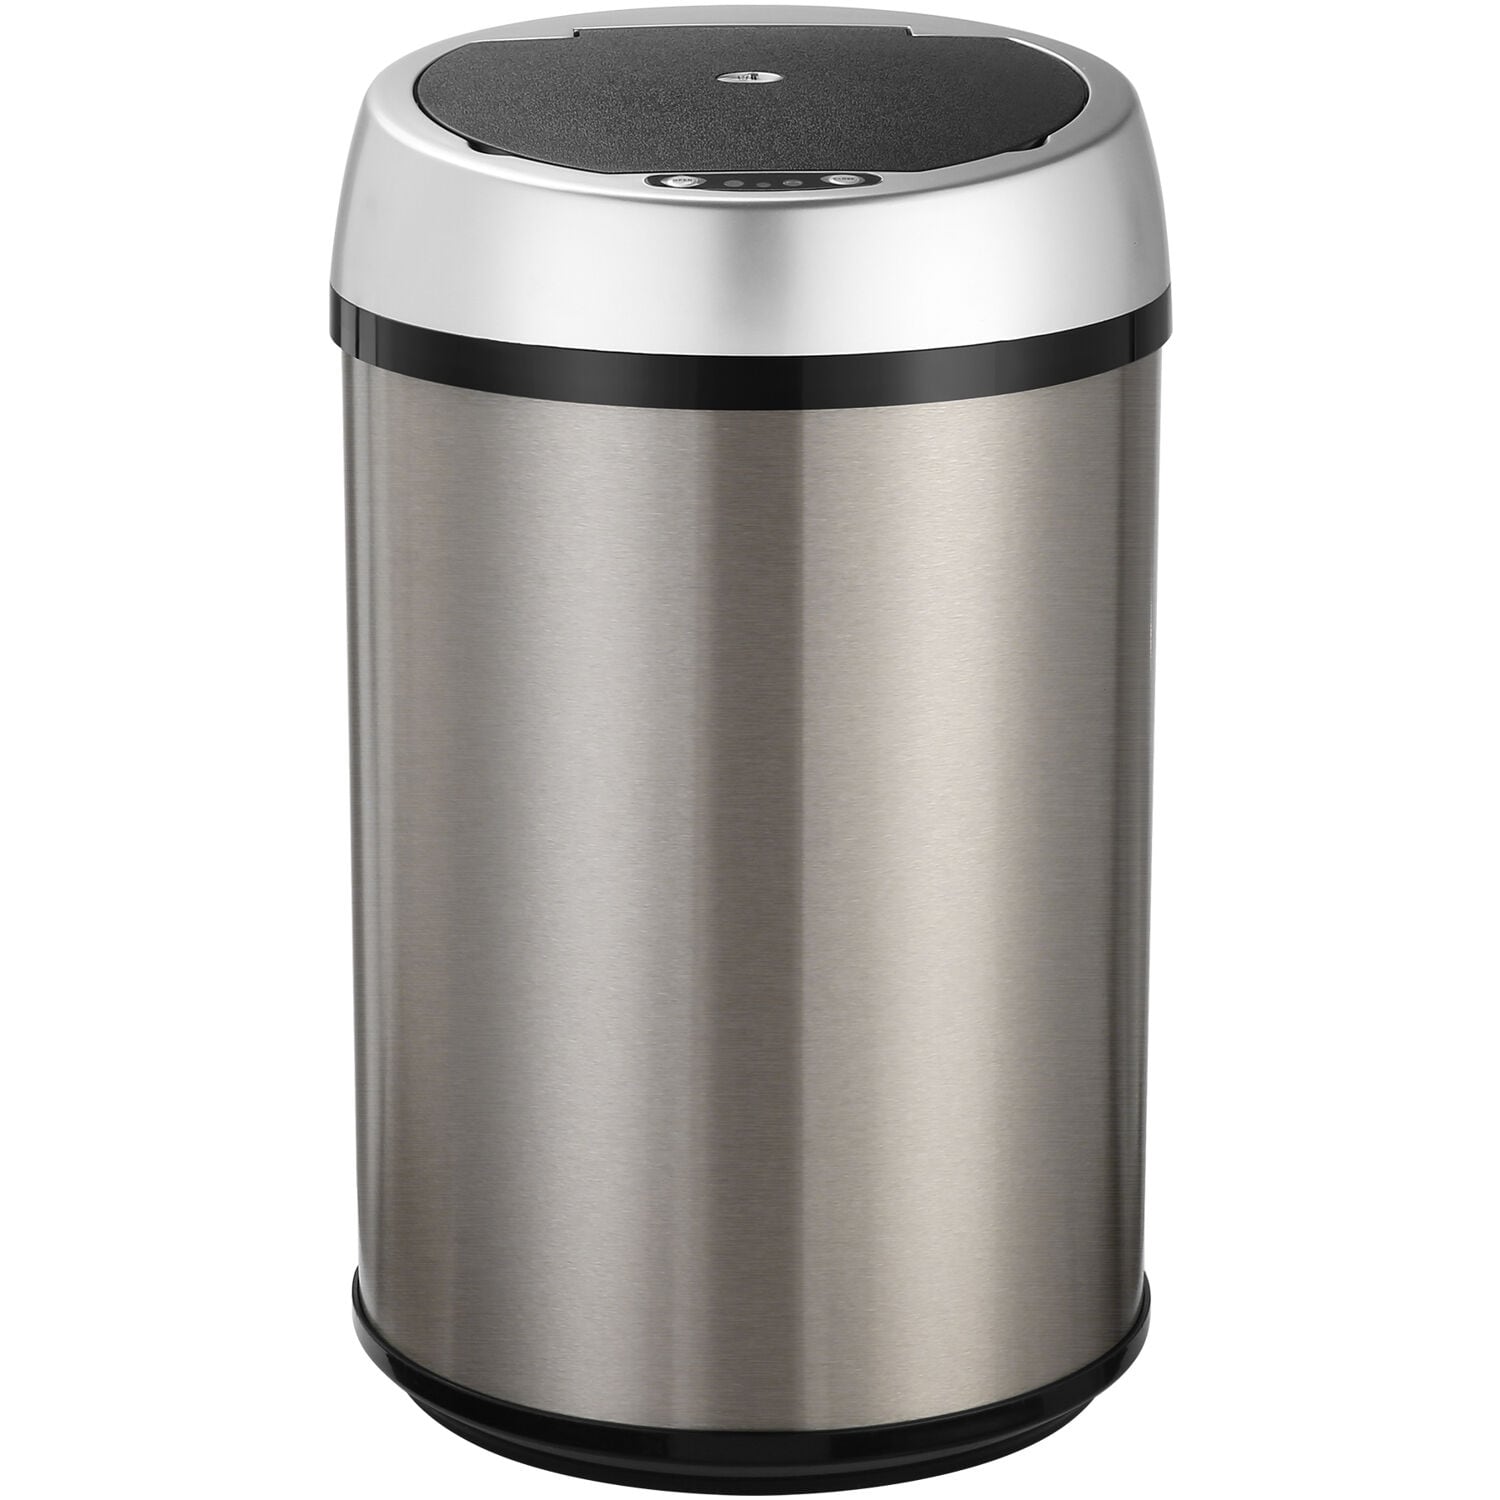 Beyond Stainless Steel: Colorful Kitchen Trash Cans from Brabantia